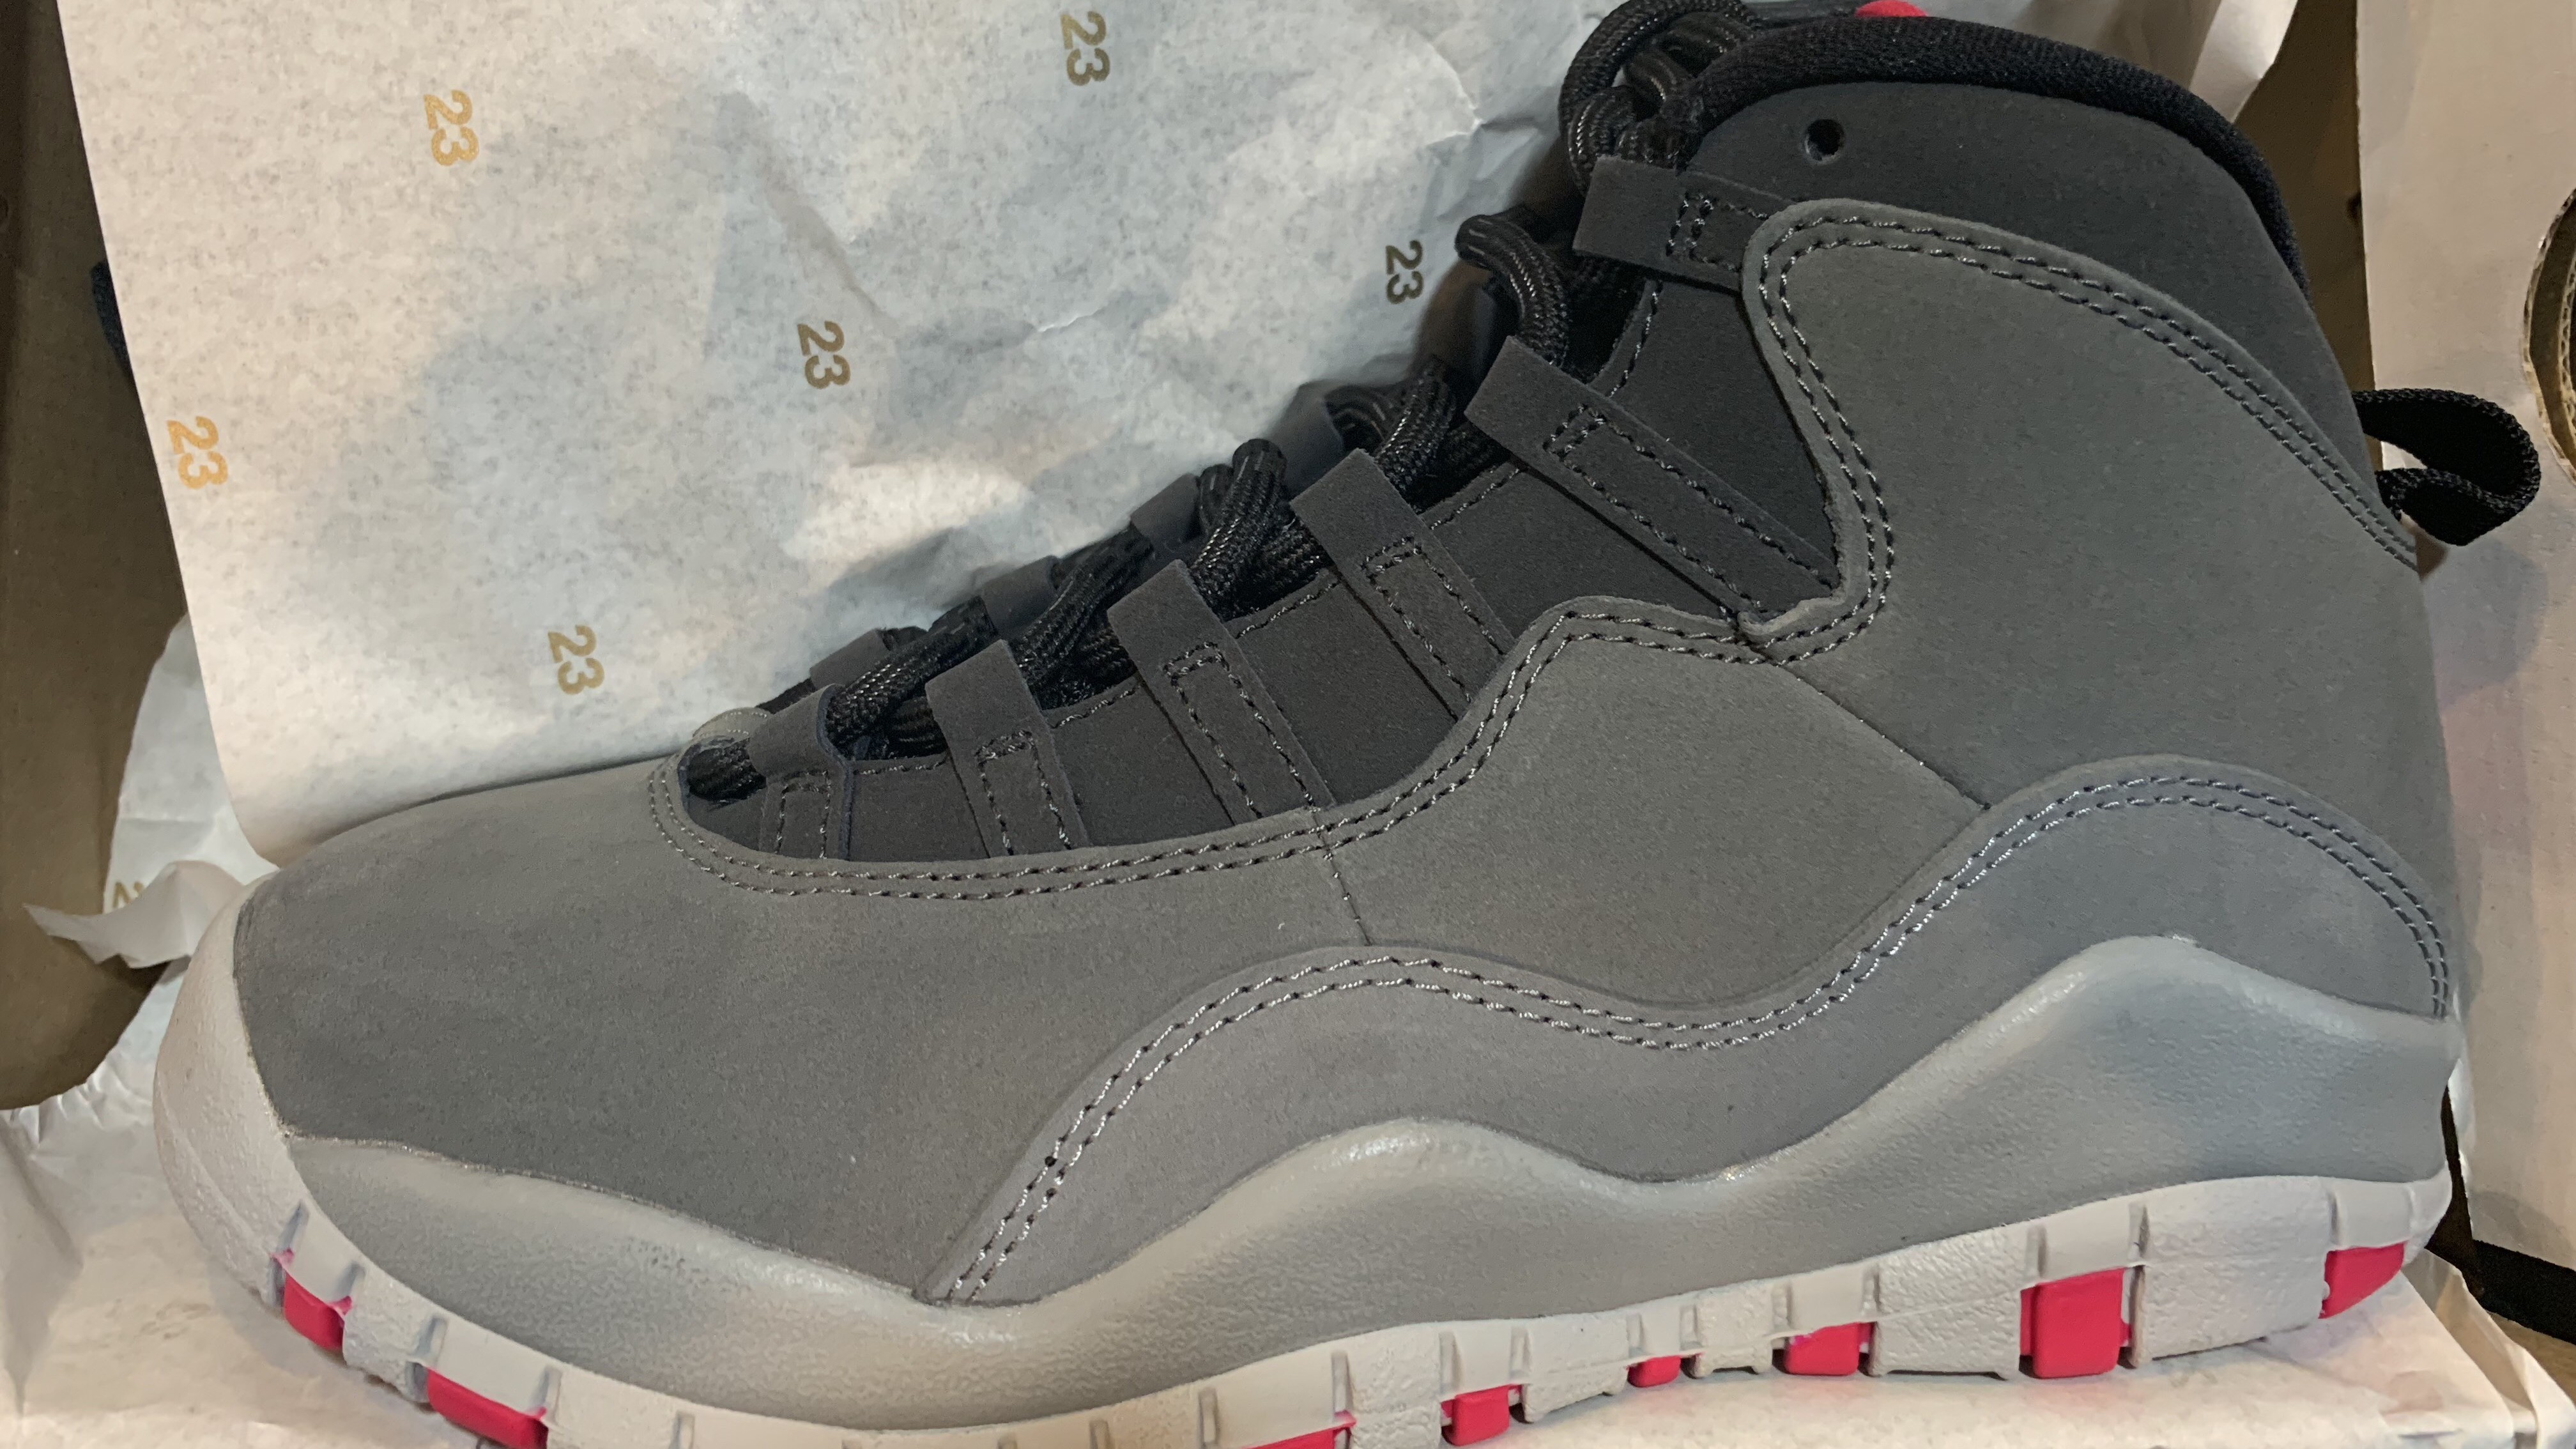 gray and black 10s